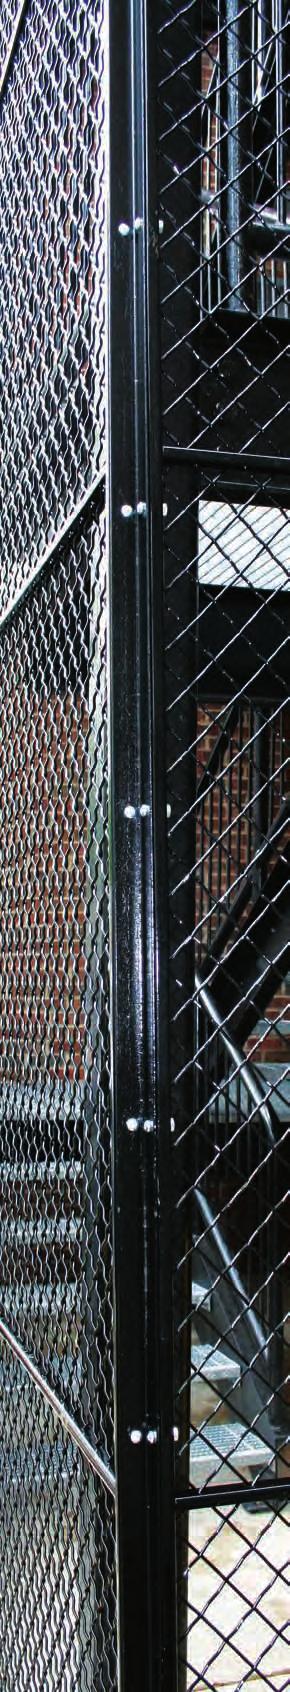 HINGE 7 12 WIRE MESH PARTITIONS ALL WIRE TYPE No. 130A Basic all wire type for normal industrial use. 7, 8, 9, 10 and 12 standard heights. TS / TECHNICAL SUPPORT SPECIFICATIONS Partitions shall be no.